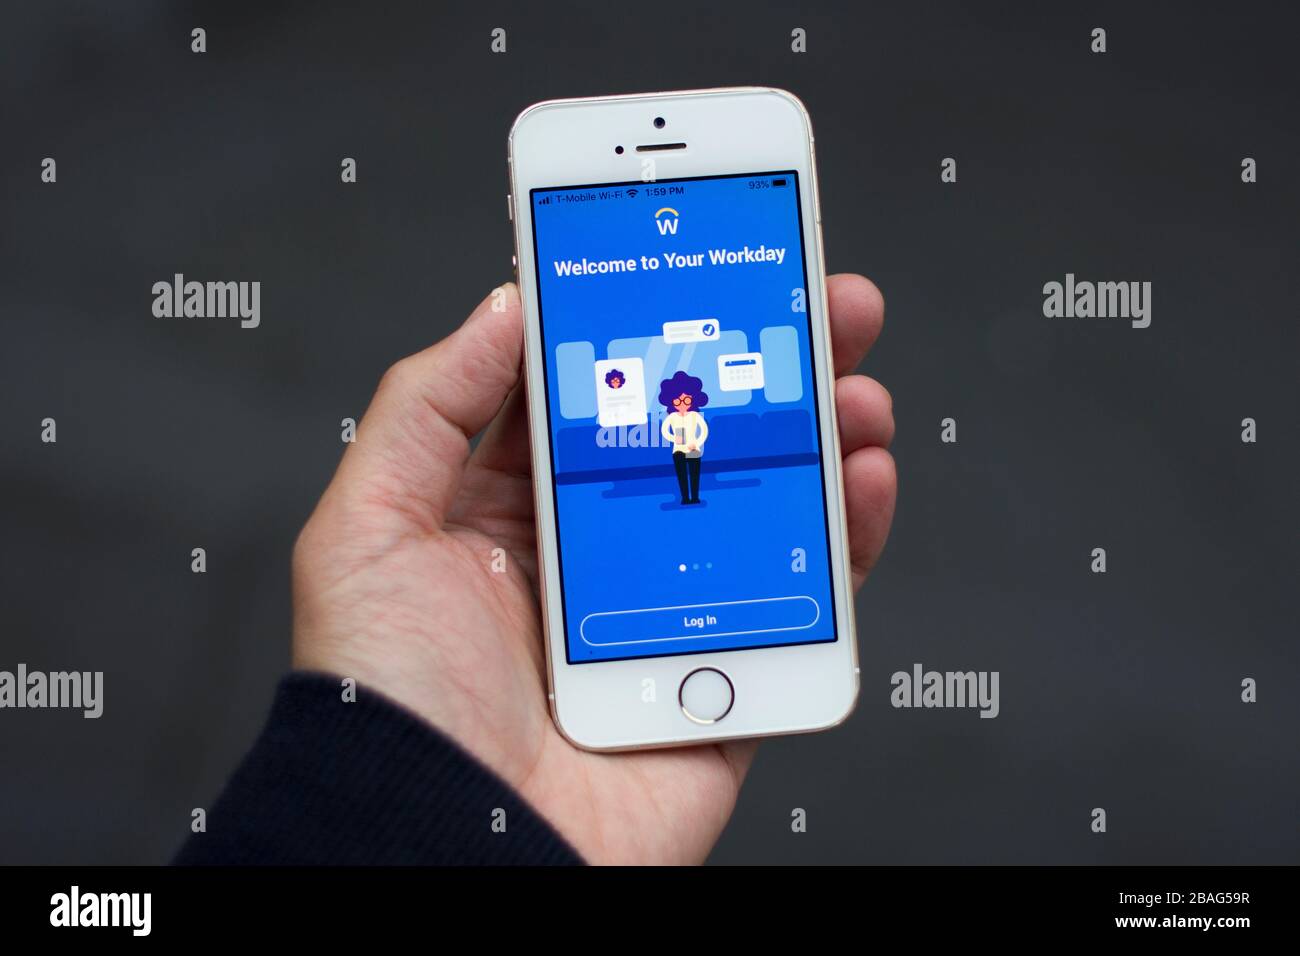 Workday mobile app login screen seen on a smartphone in user's hand. It provides mobile access to Workday cloud platform enterprise-class applications. Stock Photo